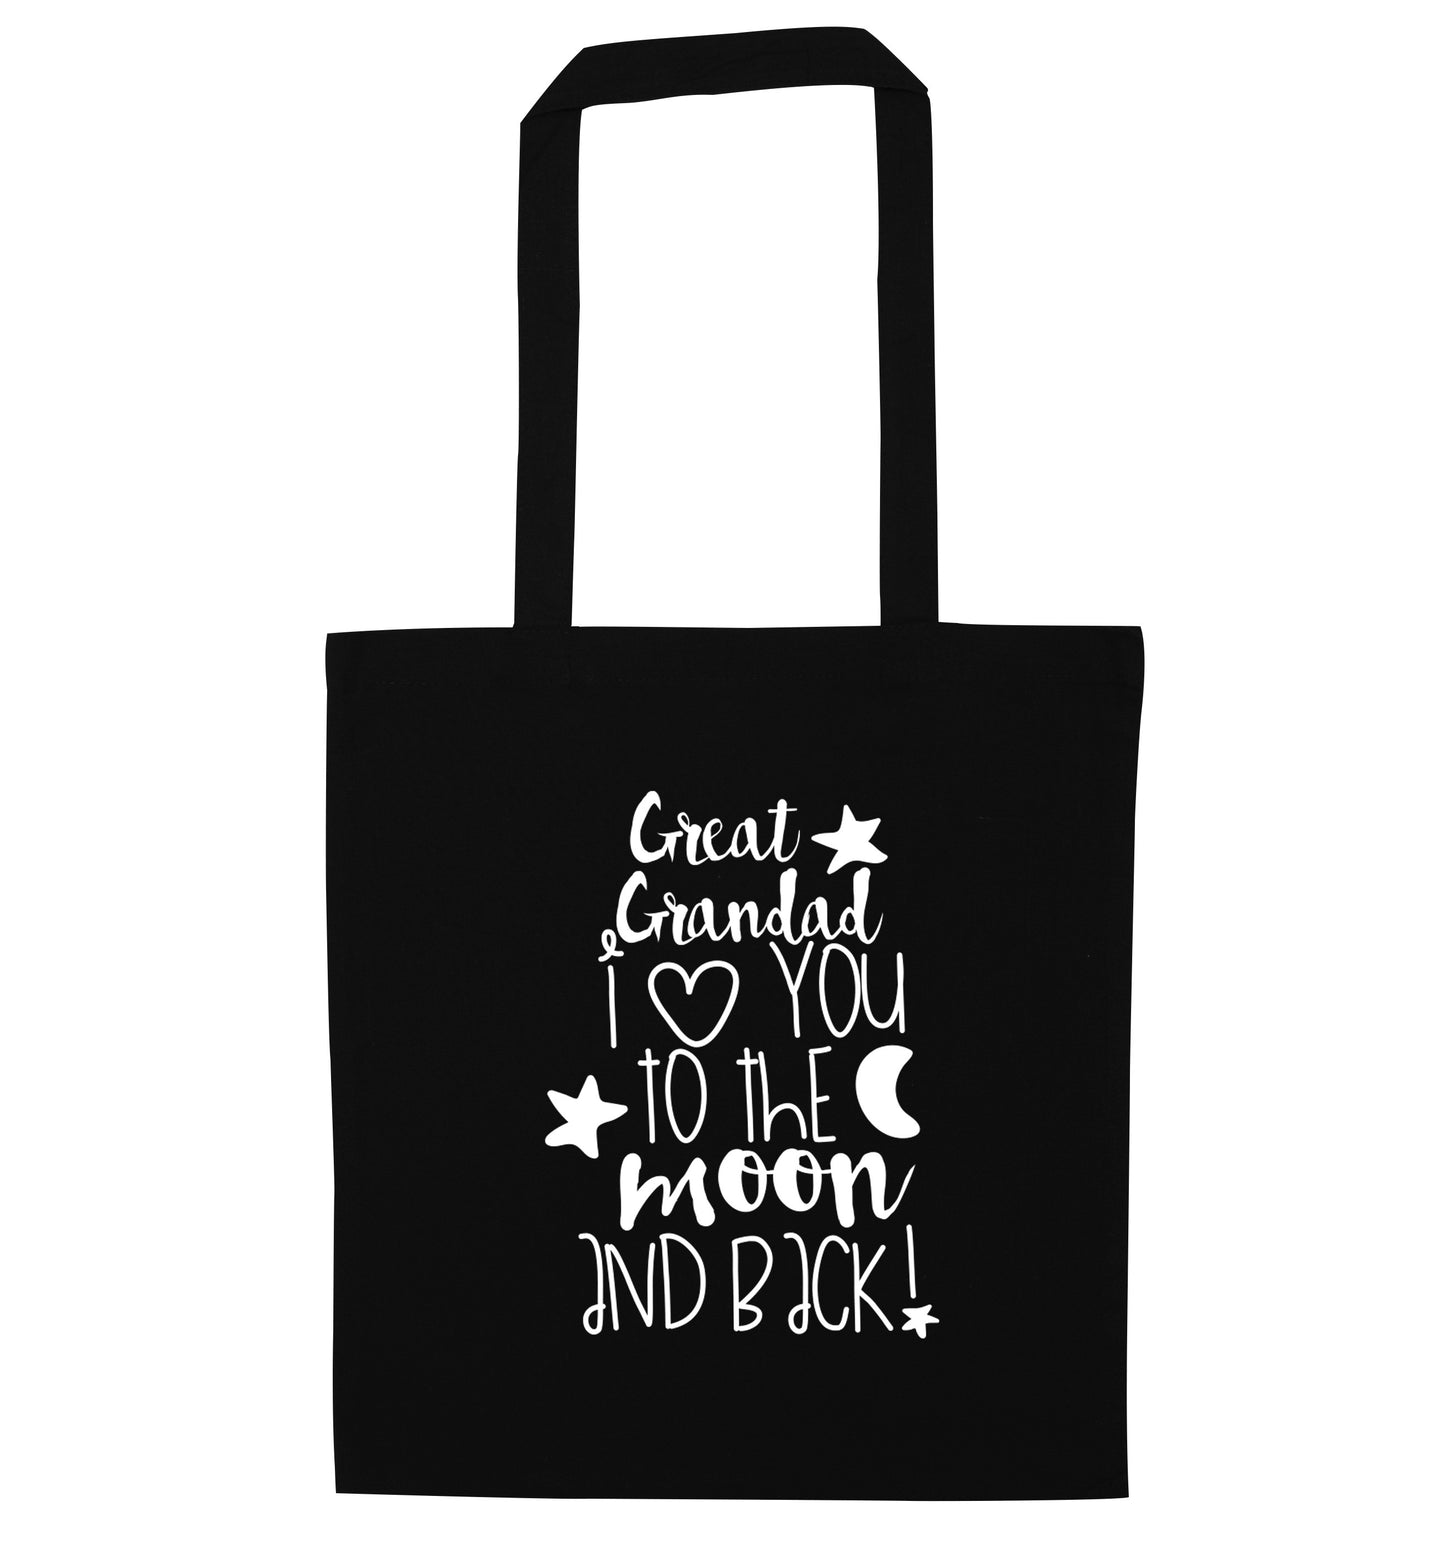 Great Grandad I love you to the moon and back black tote bag